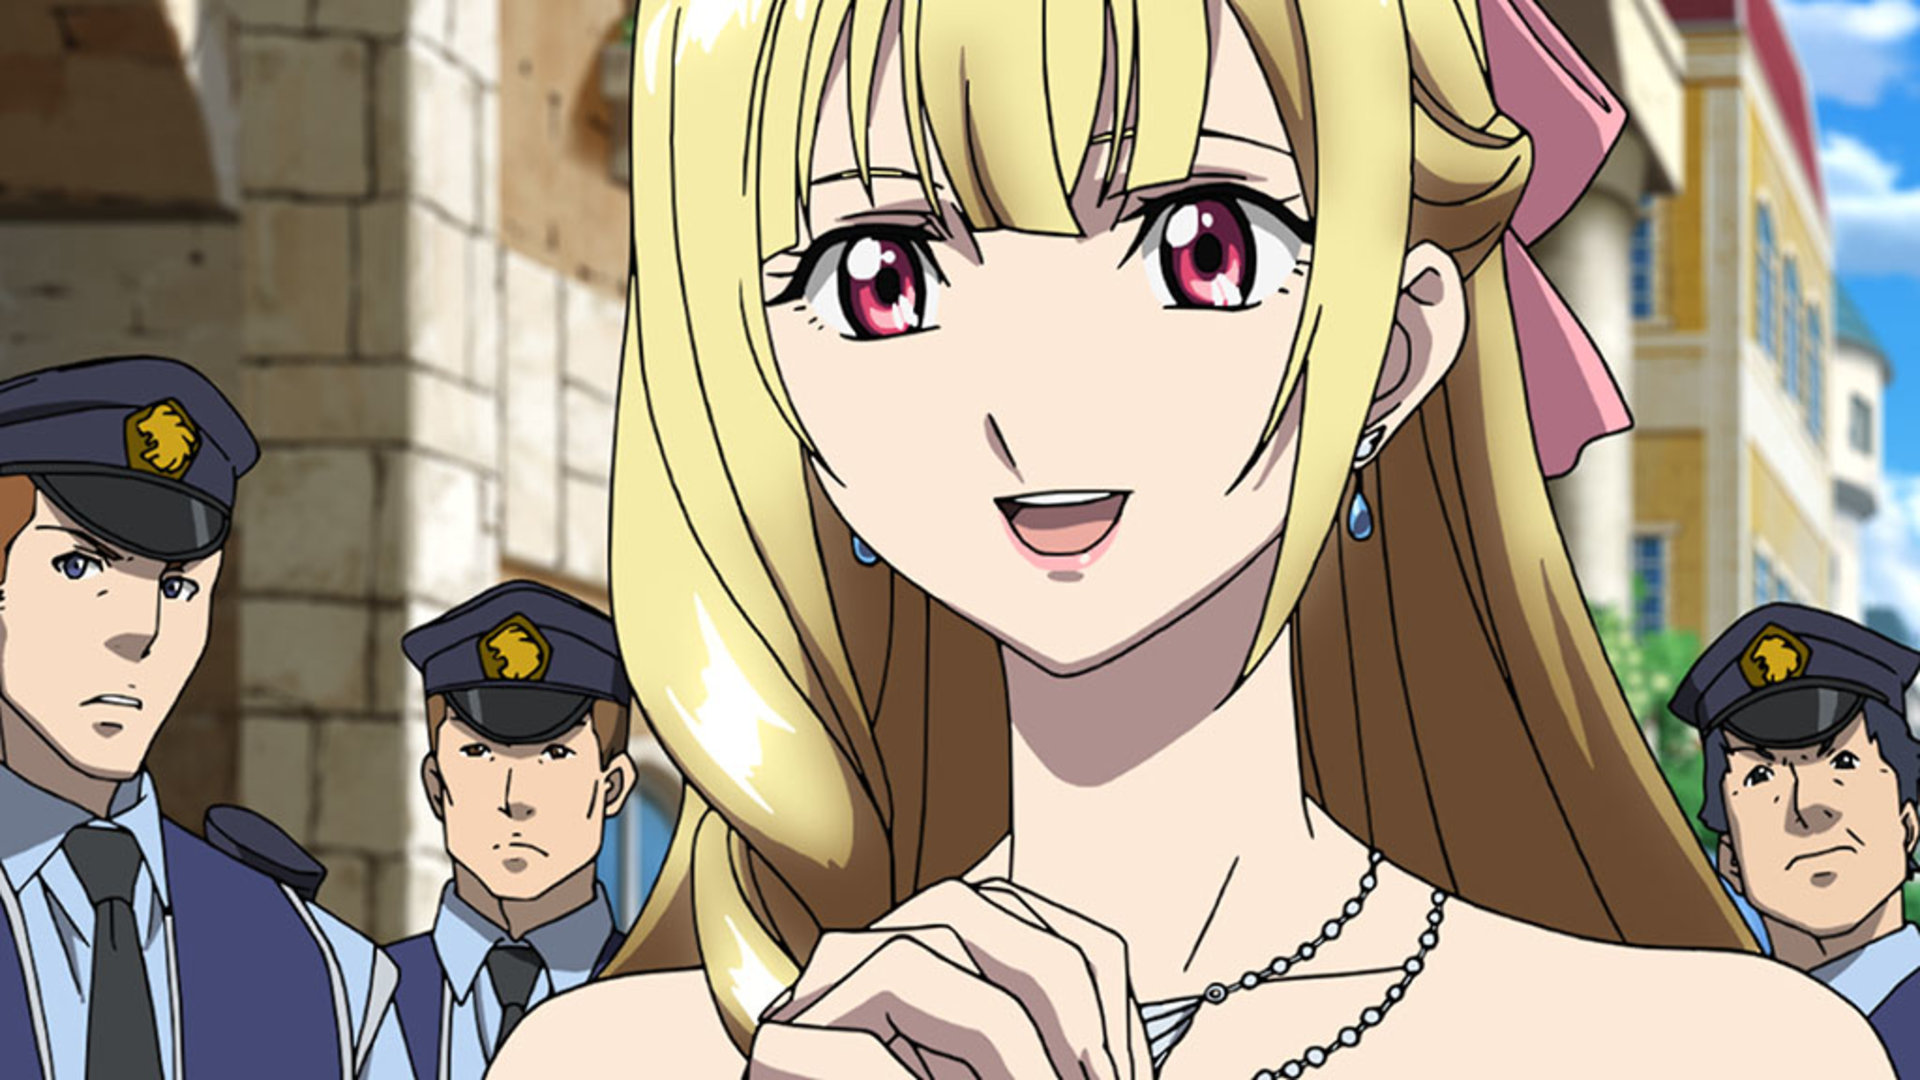 Watch Cross Ange: Rondo of Angels and Dragons Season 1 Episode 1 - Fallen  Princess Online Now